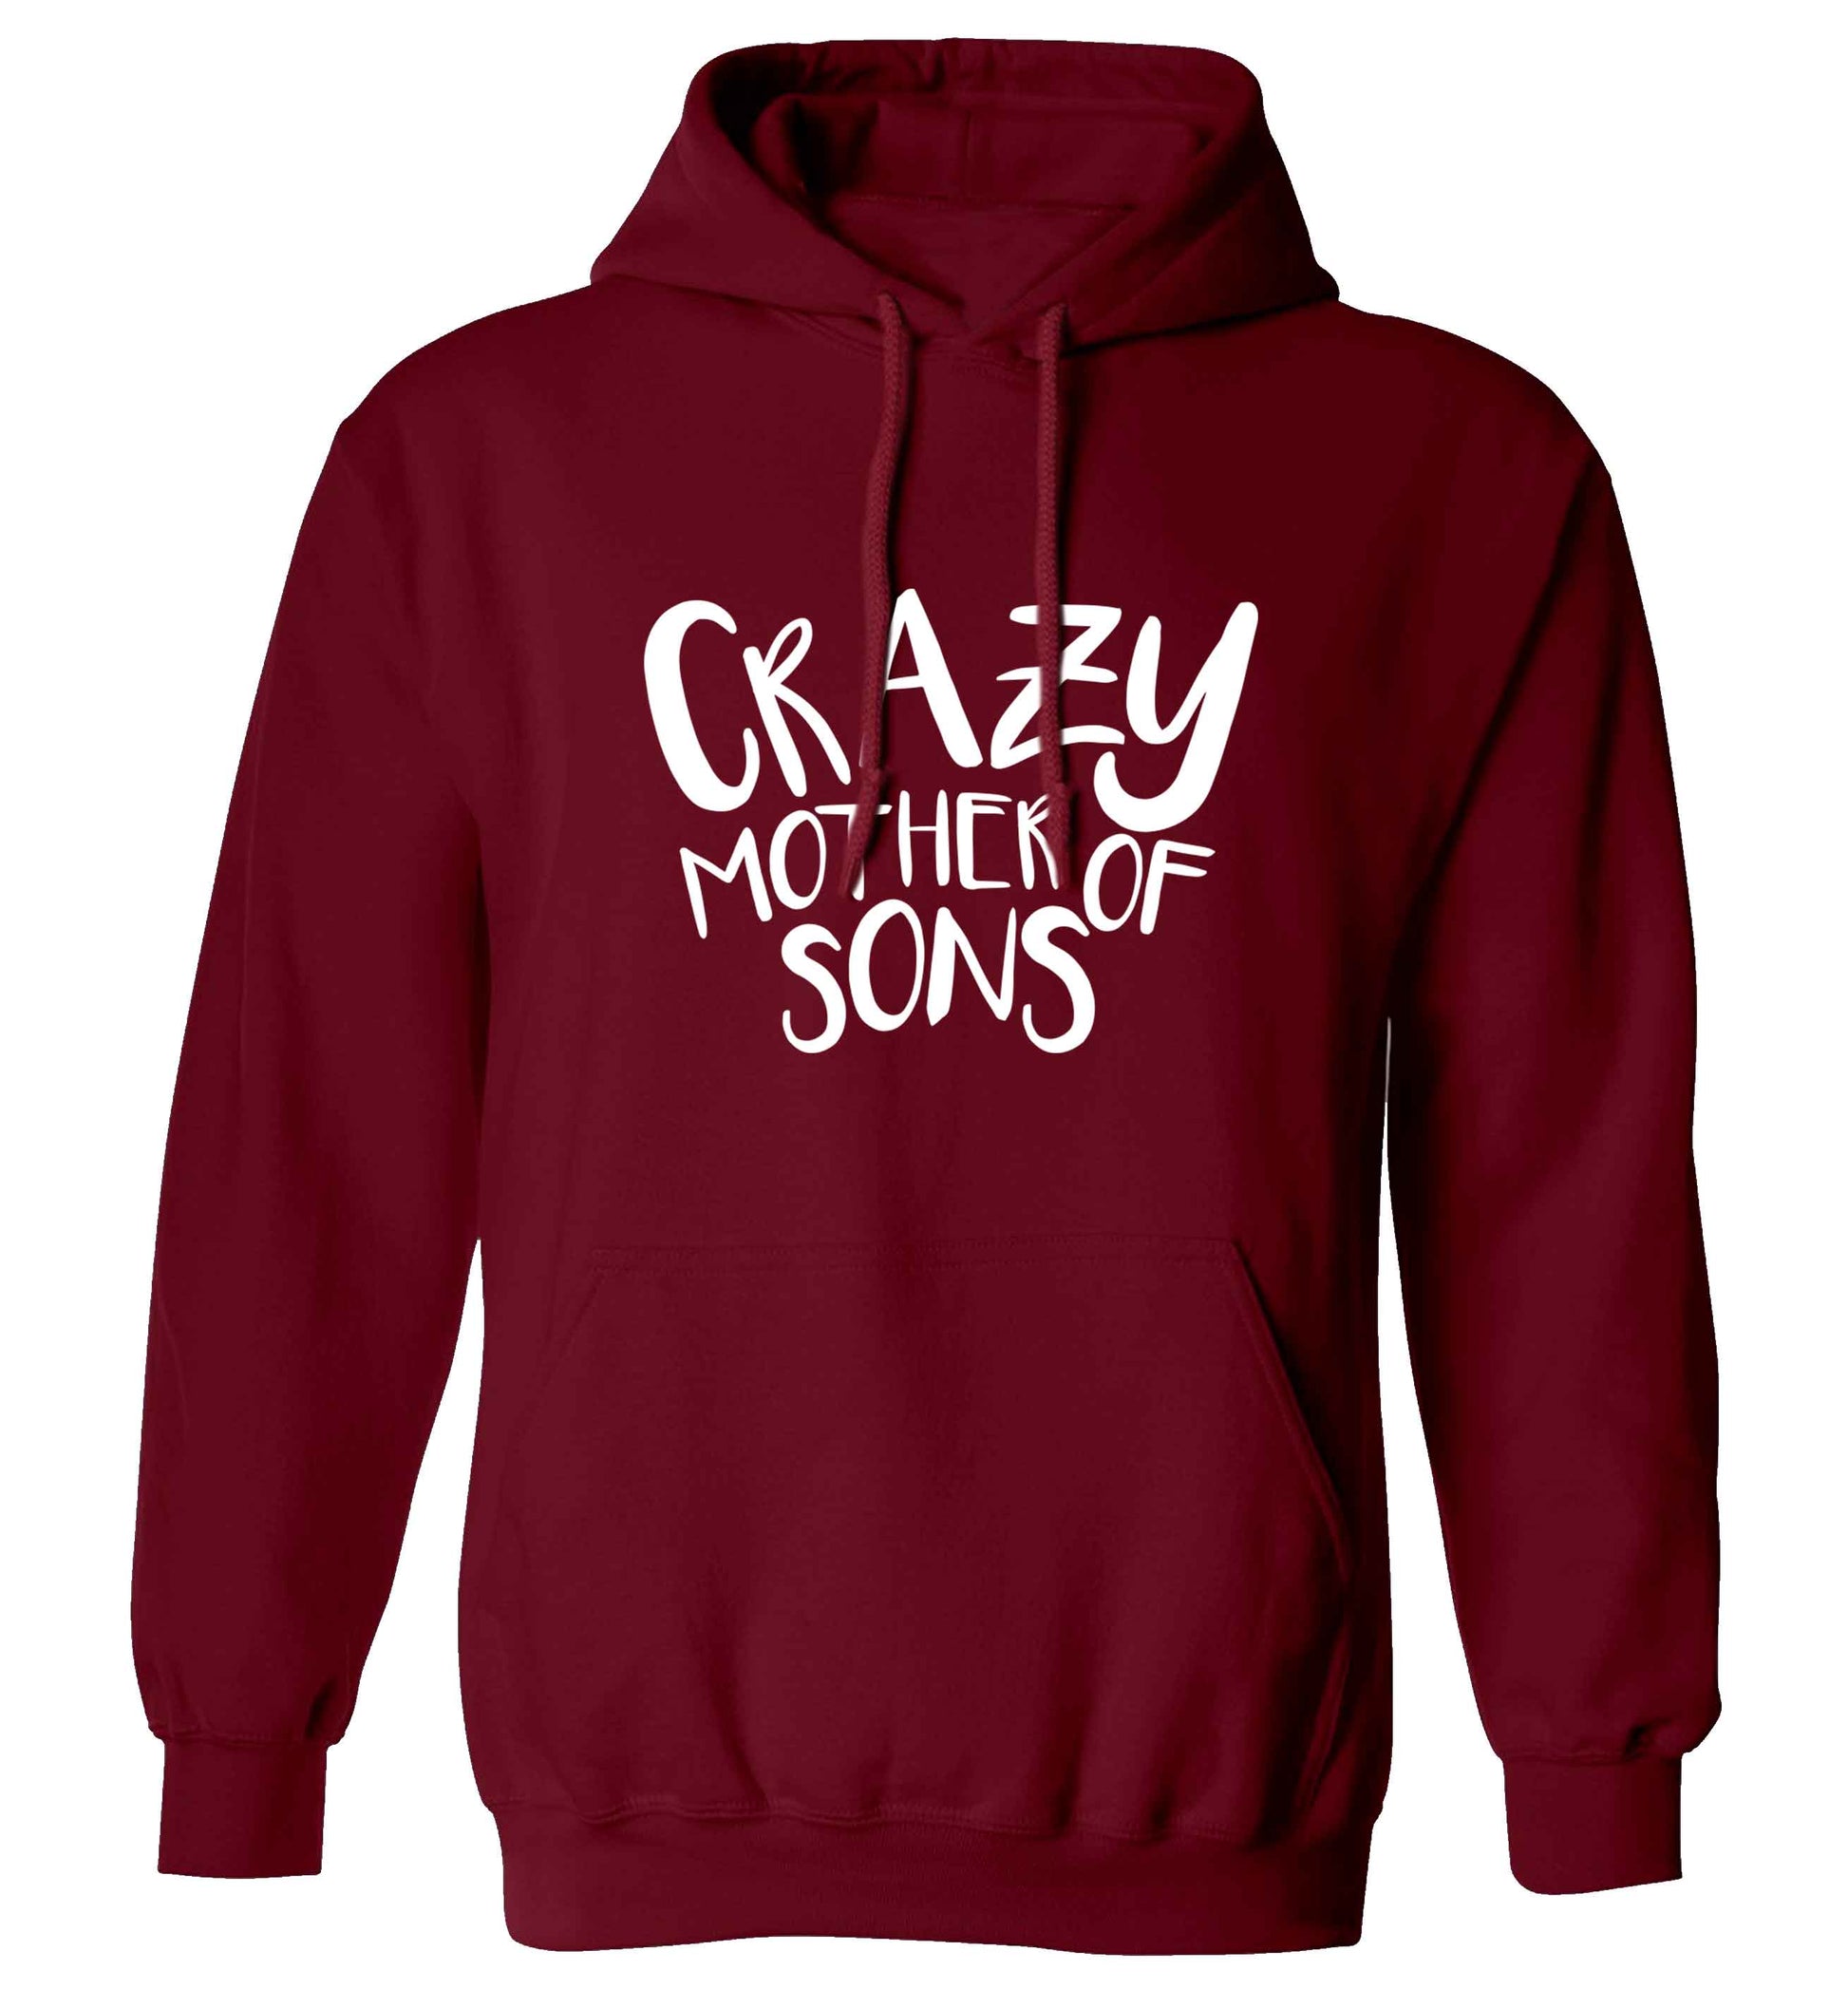 Crazy mother of sons adults unisex maroon hoodie 2XL